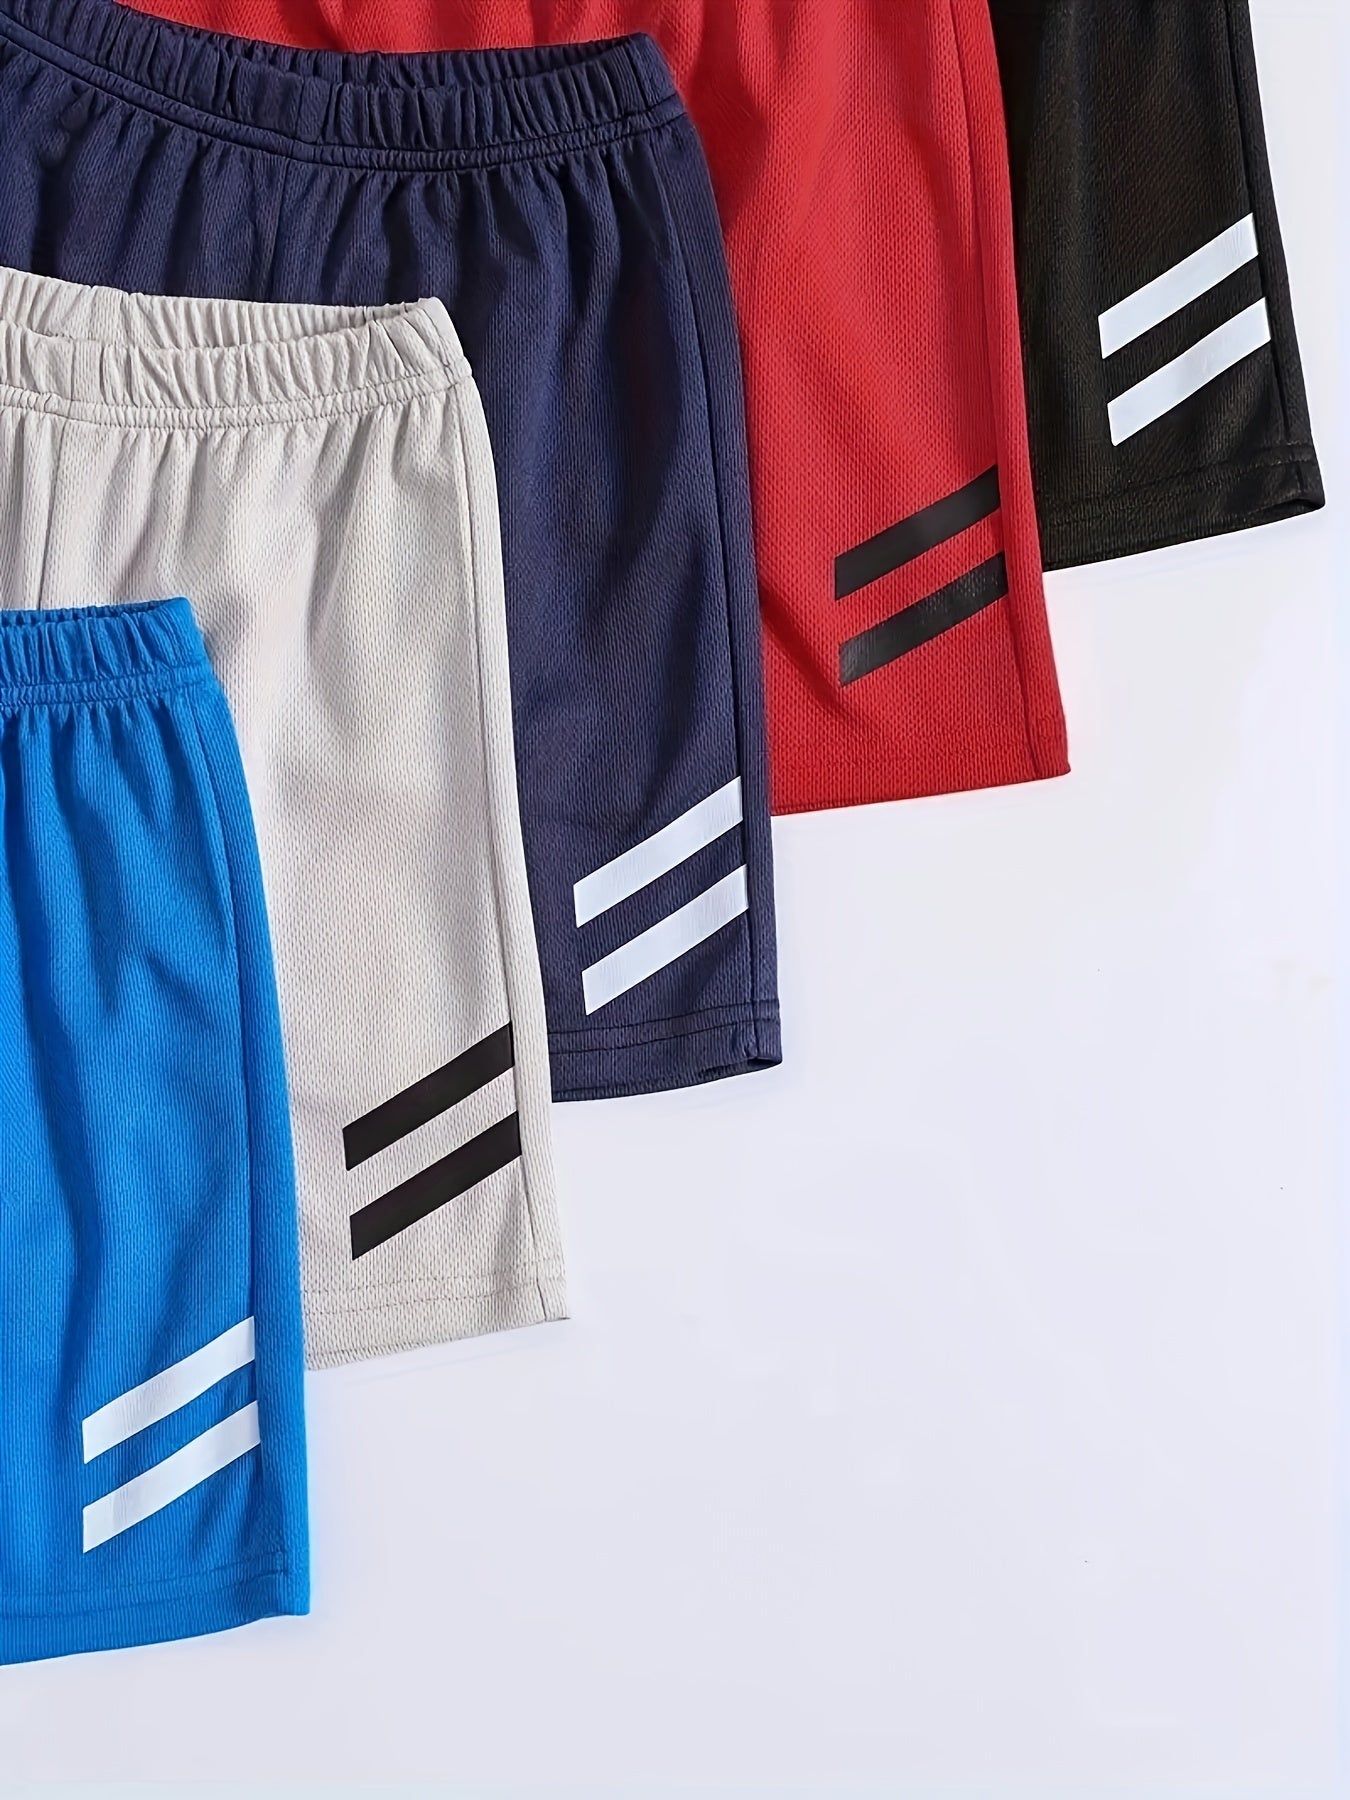 Multi-pack Boys Comfortable Creative Shorts, Casual Quick-drying Shorts For Summer Outdoor